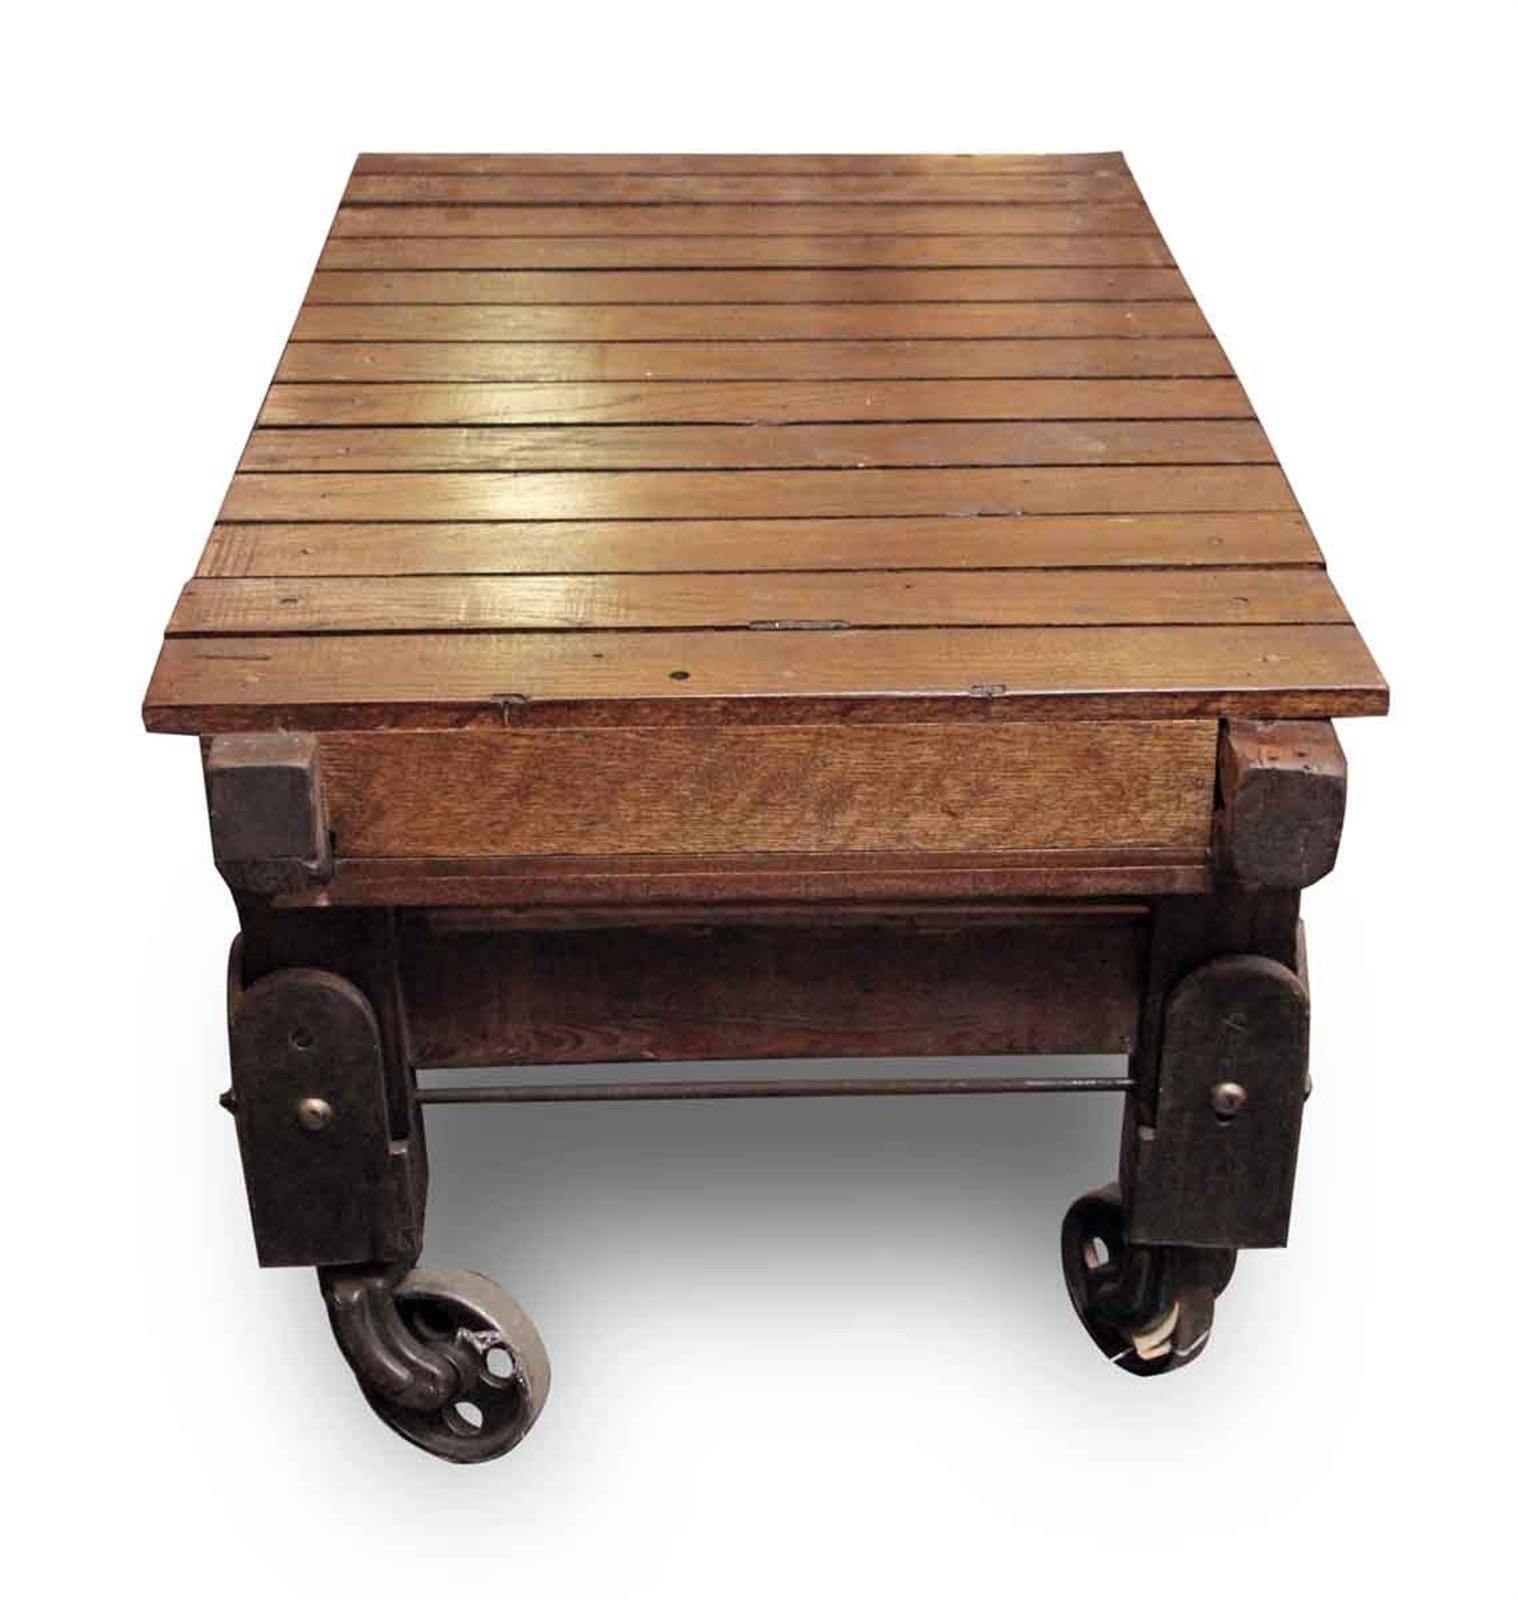 1920s extra tall foundry or factory cart table. Features wood slats and smooth rolling cast iron casters and iron supports. This can be seen at our 302 Bowery location in Manhattan. Restored.